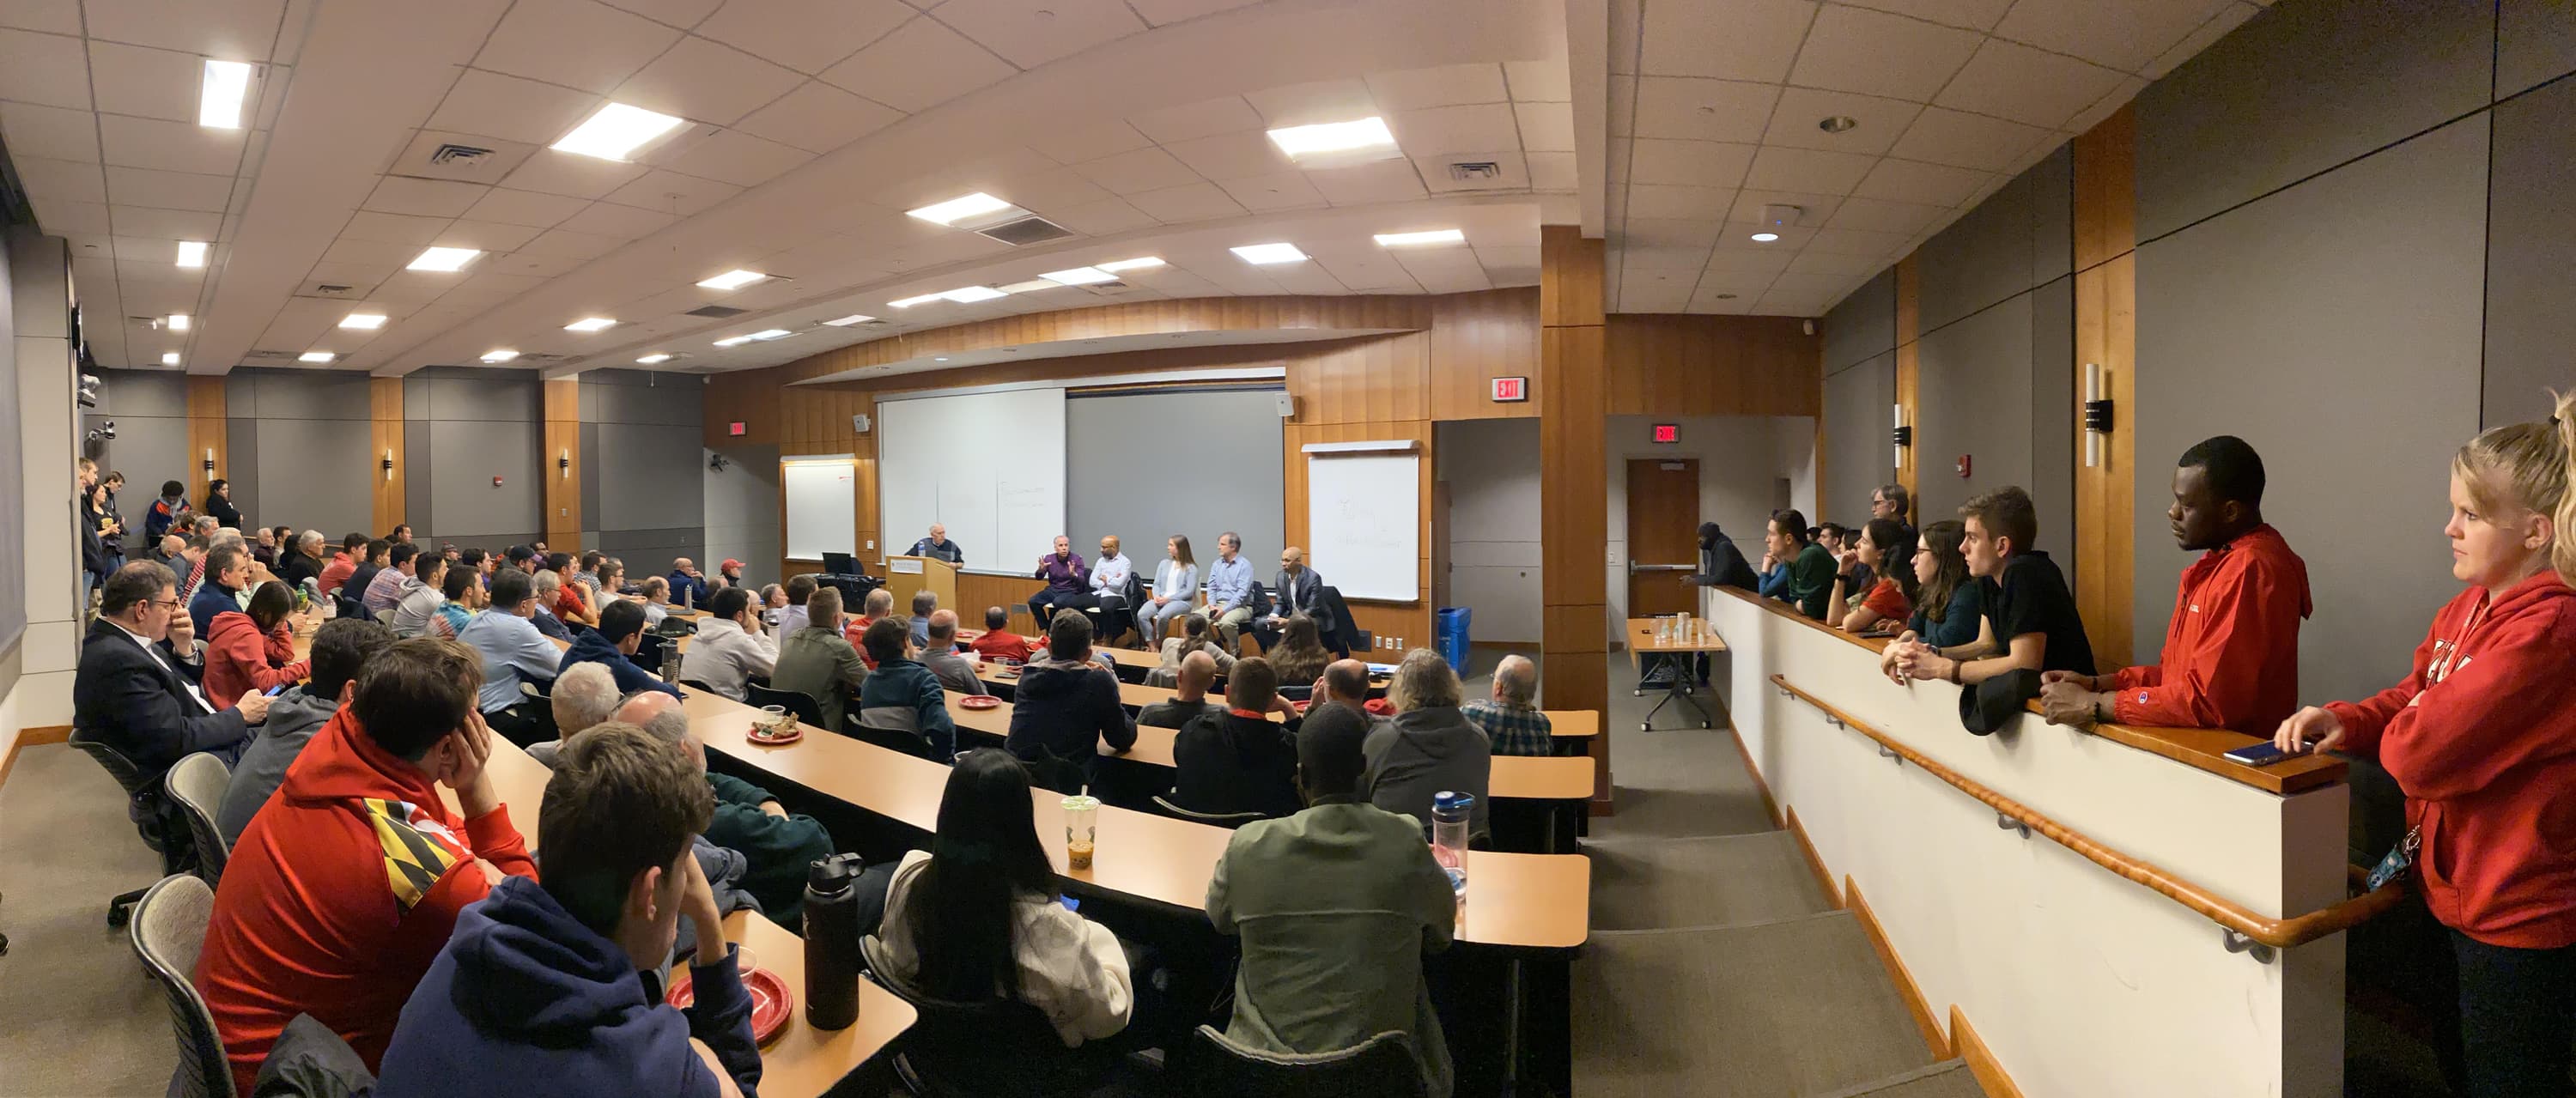 Students fill classroom with panel speaking in the front of the room